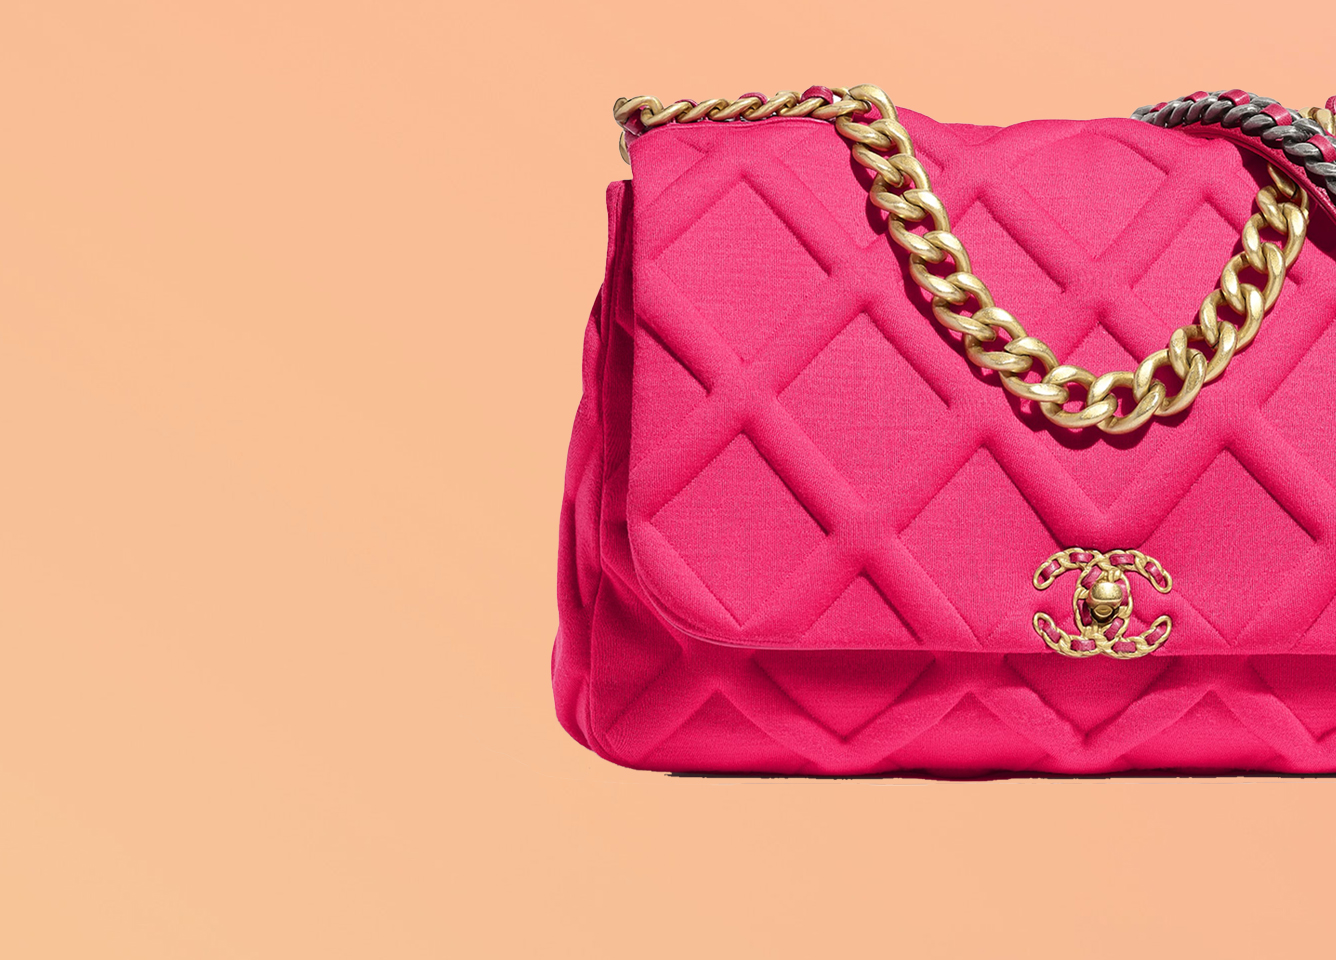 FASHIONPHILE Launches New Service To Help You Sell Your Bags